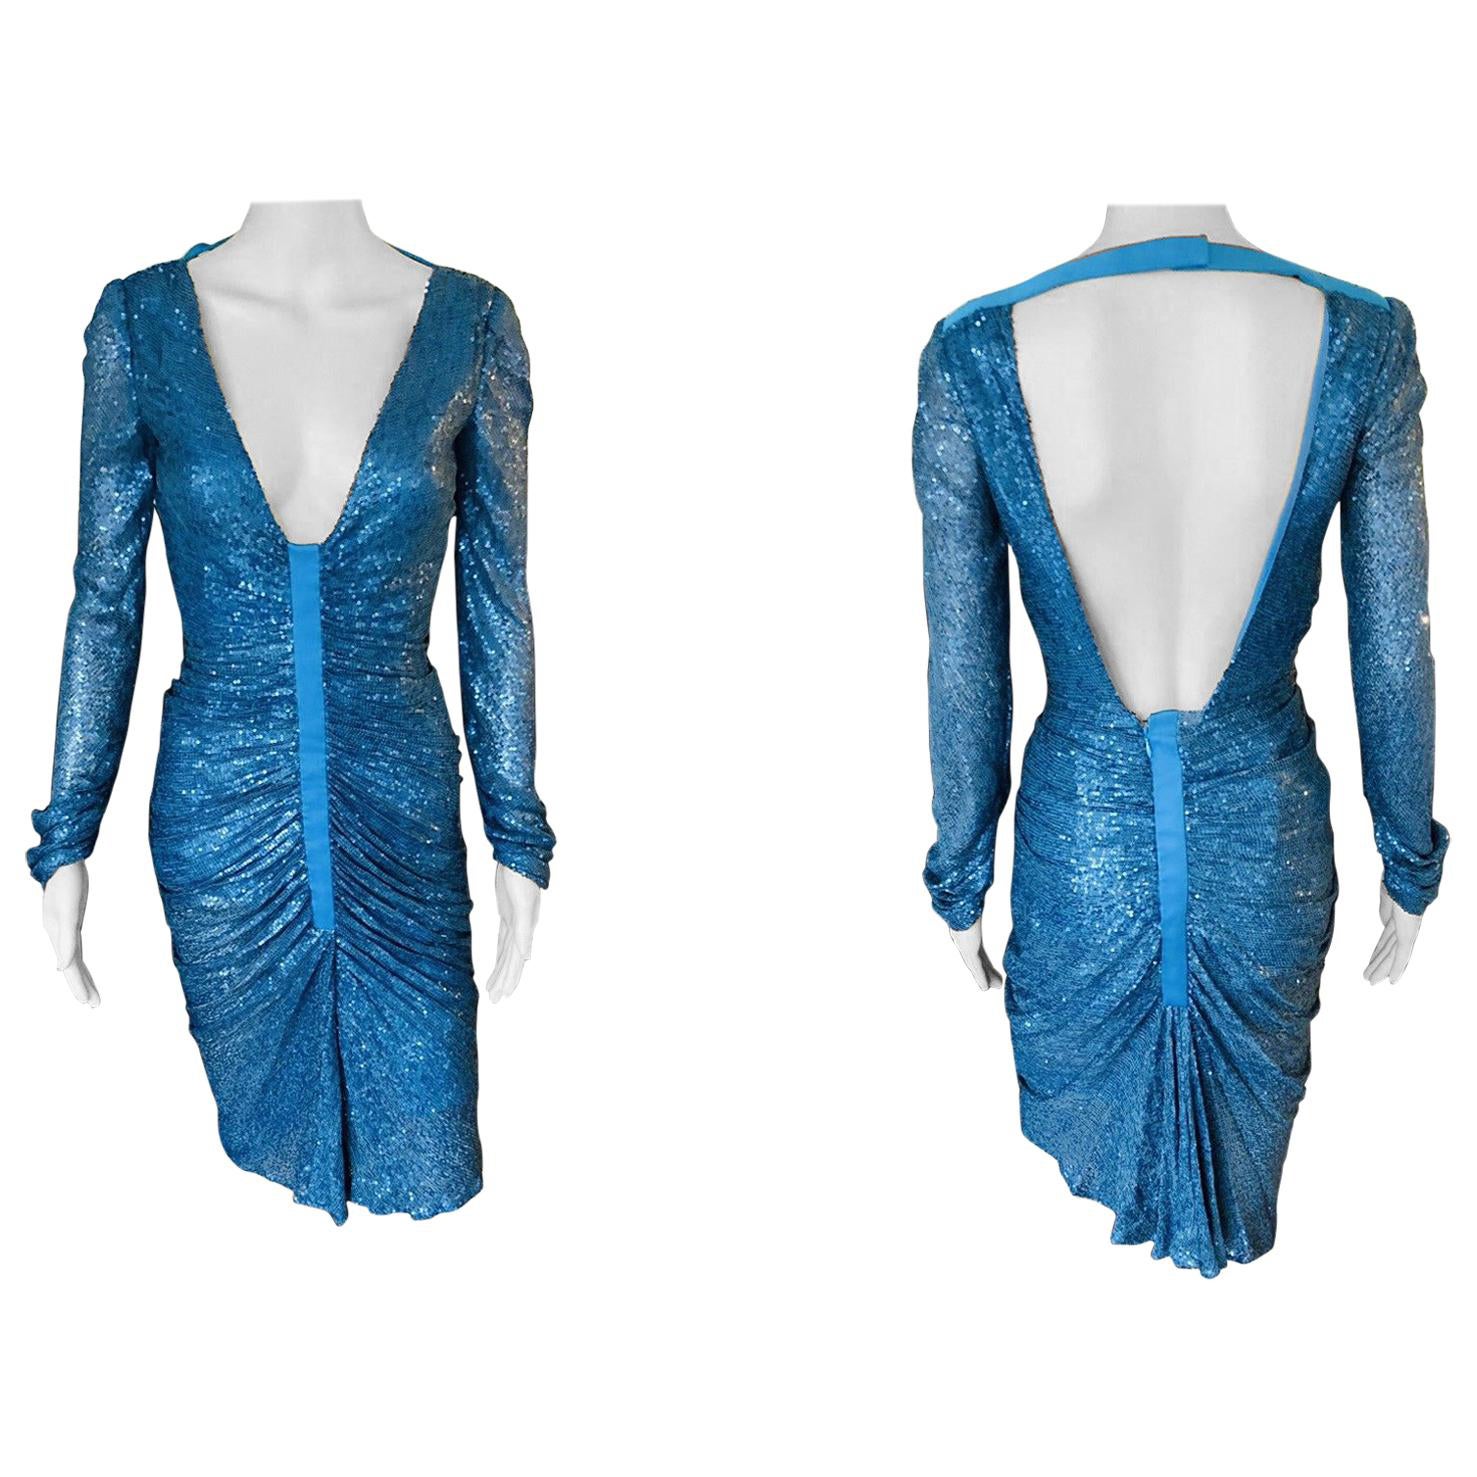 Gianni Versace S/S 2001 Runway Blue Sequin Embellished Cutout Back Dress Gown For Sale